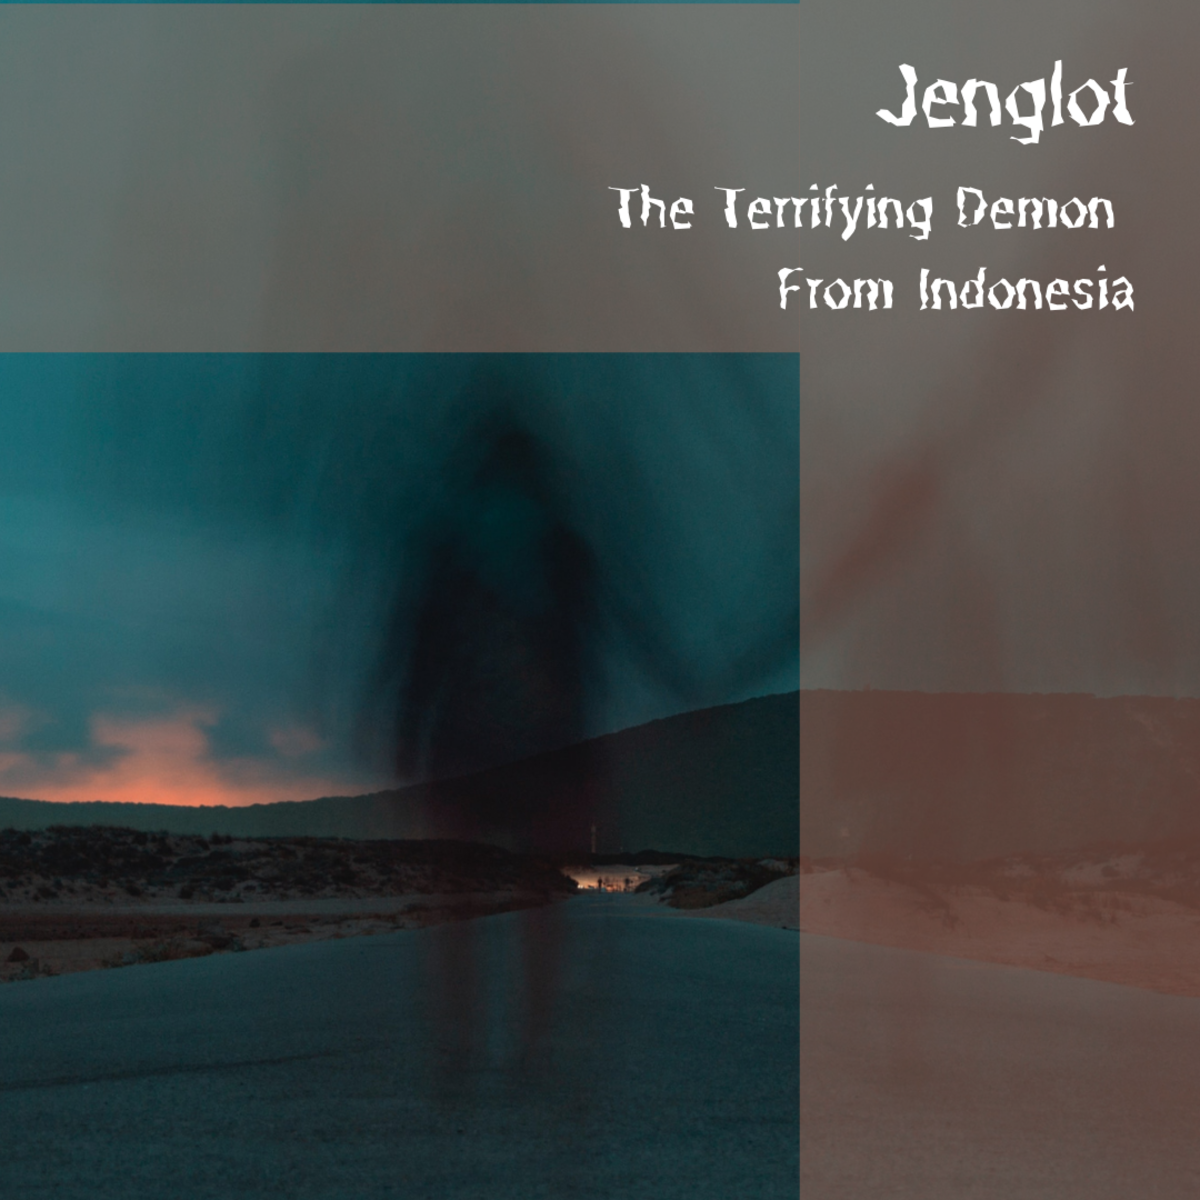 The Jenglot Is a Mythical Beast